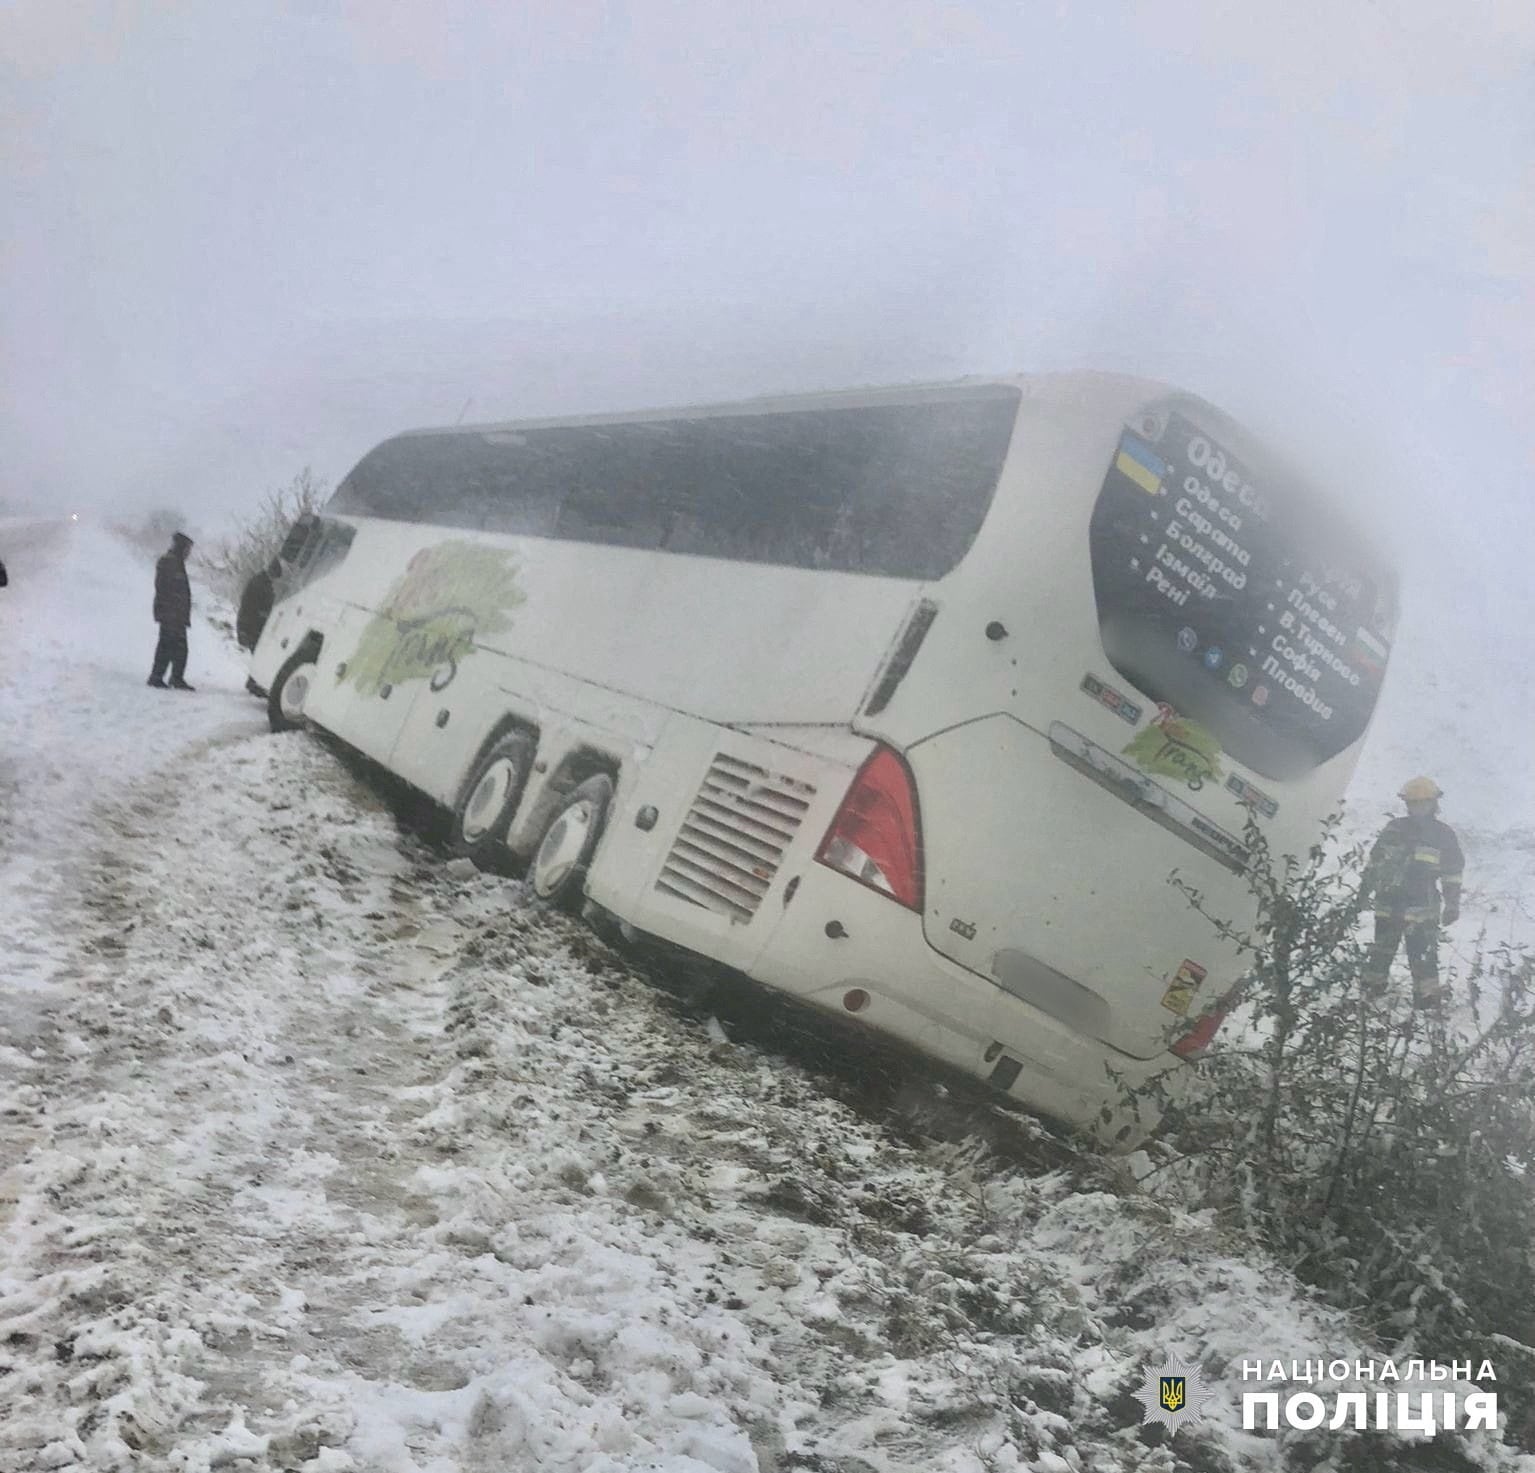 Emergency workers release a passenger bus which is stuck outside a road during a heavy snow storm in Odesa region